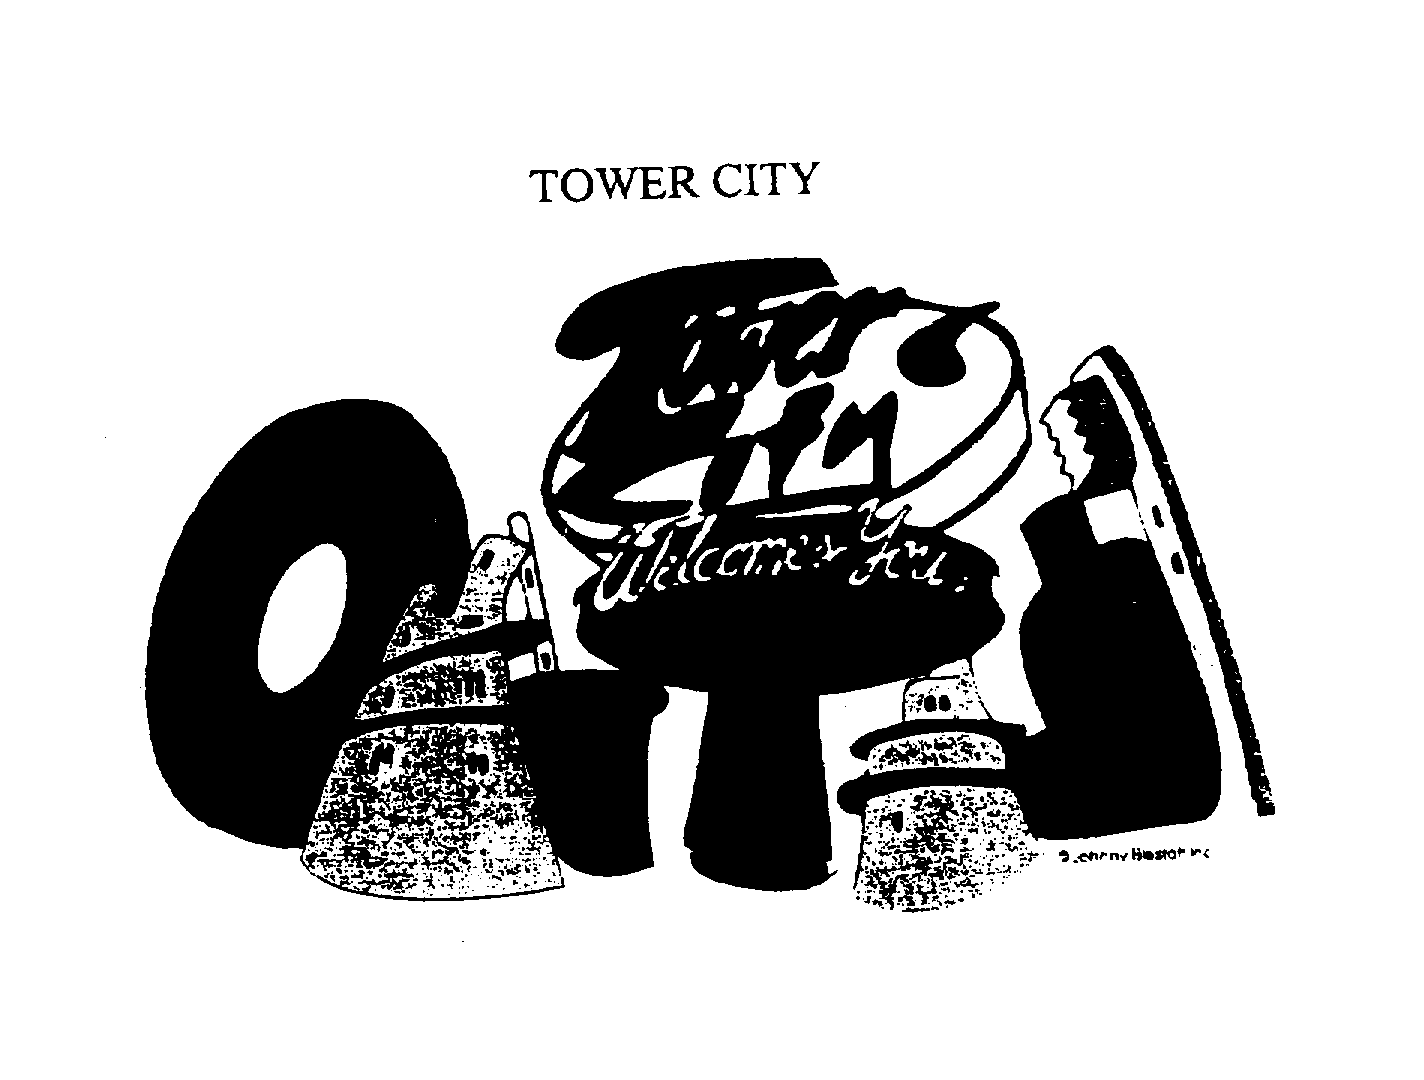  TOWER CITY TOWER CITY WELCOMES YOU